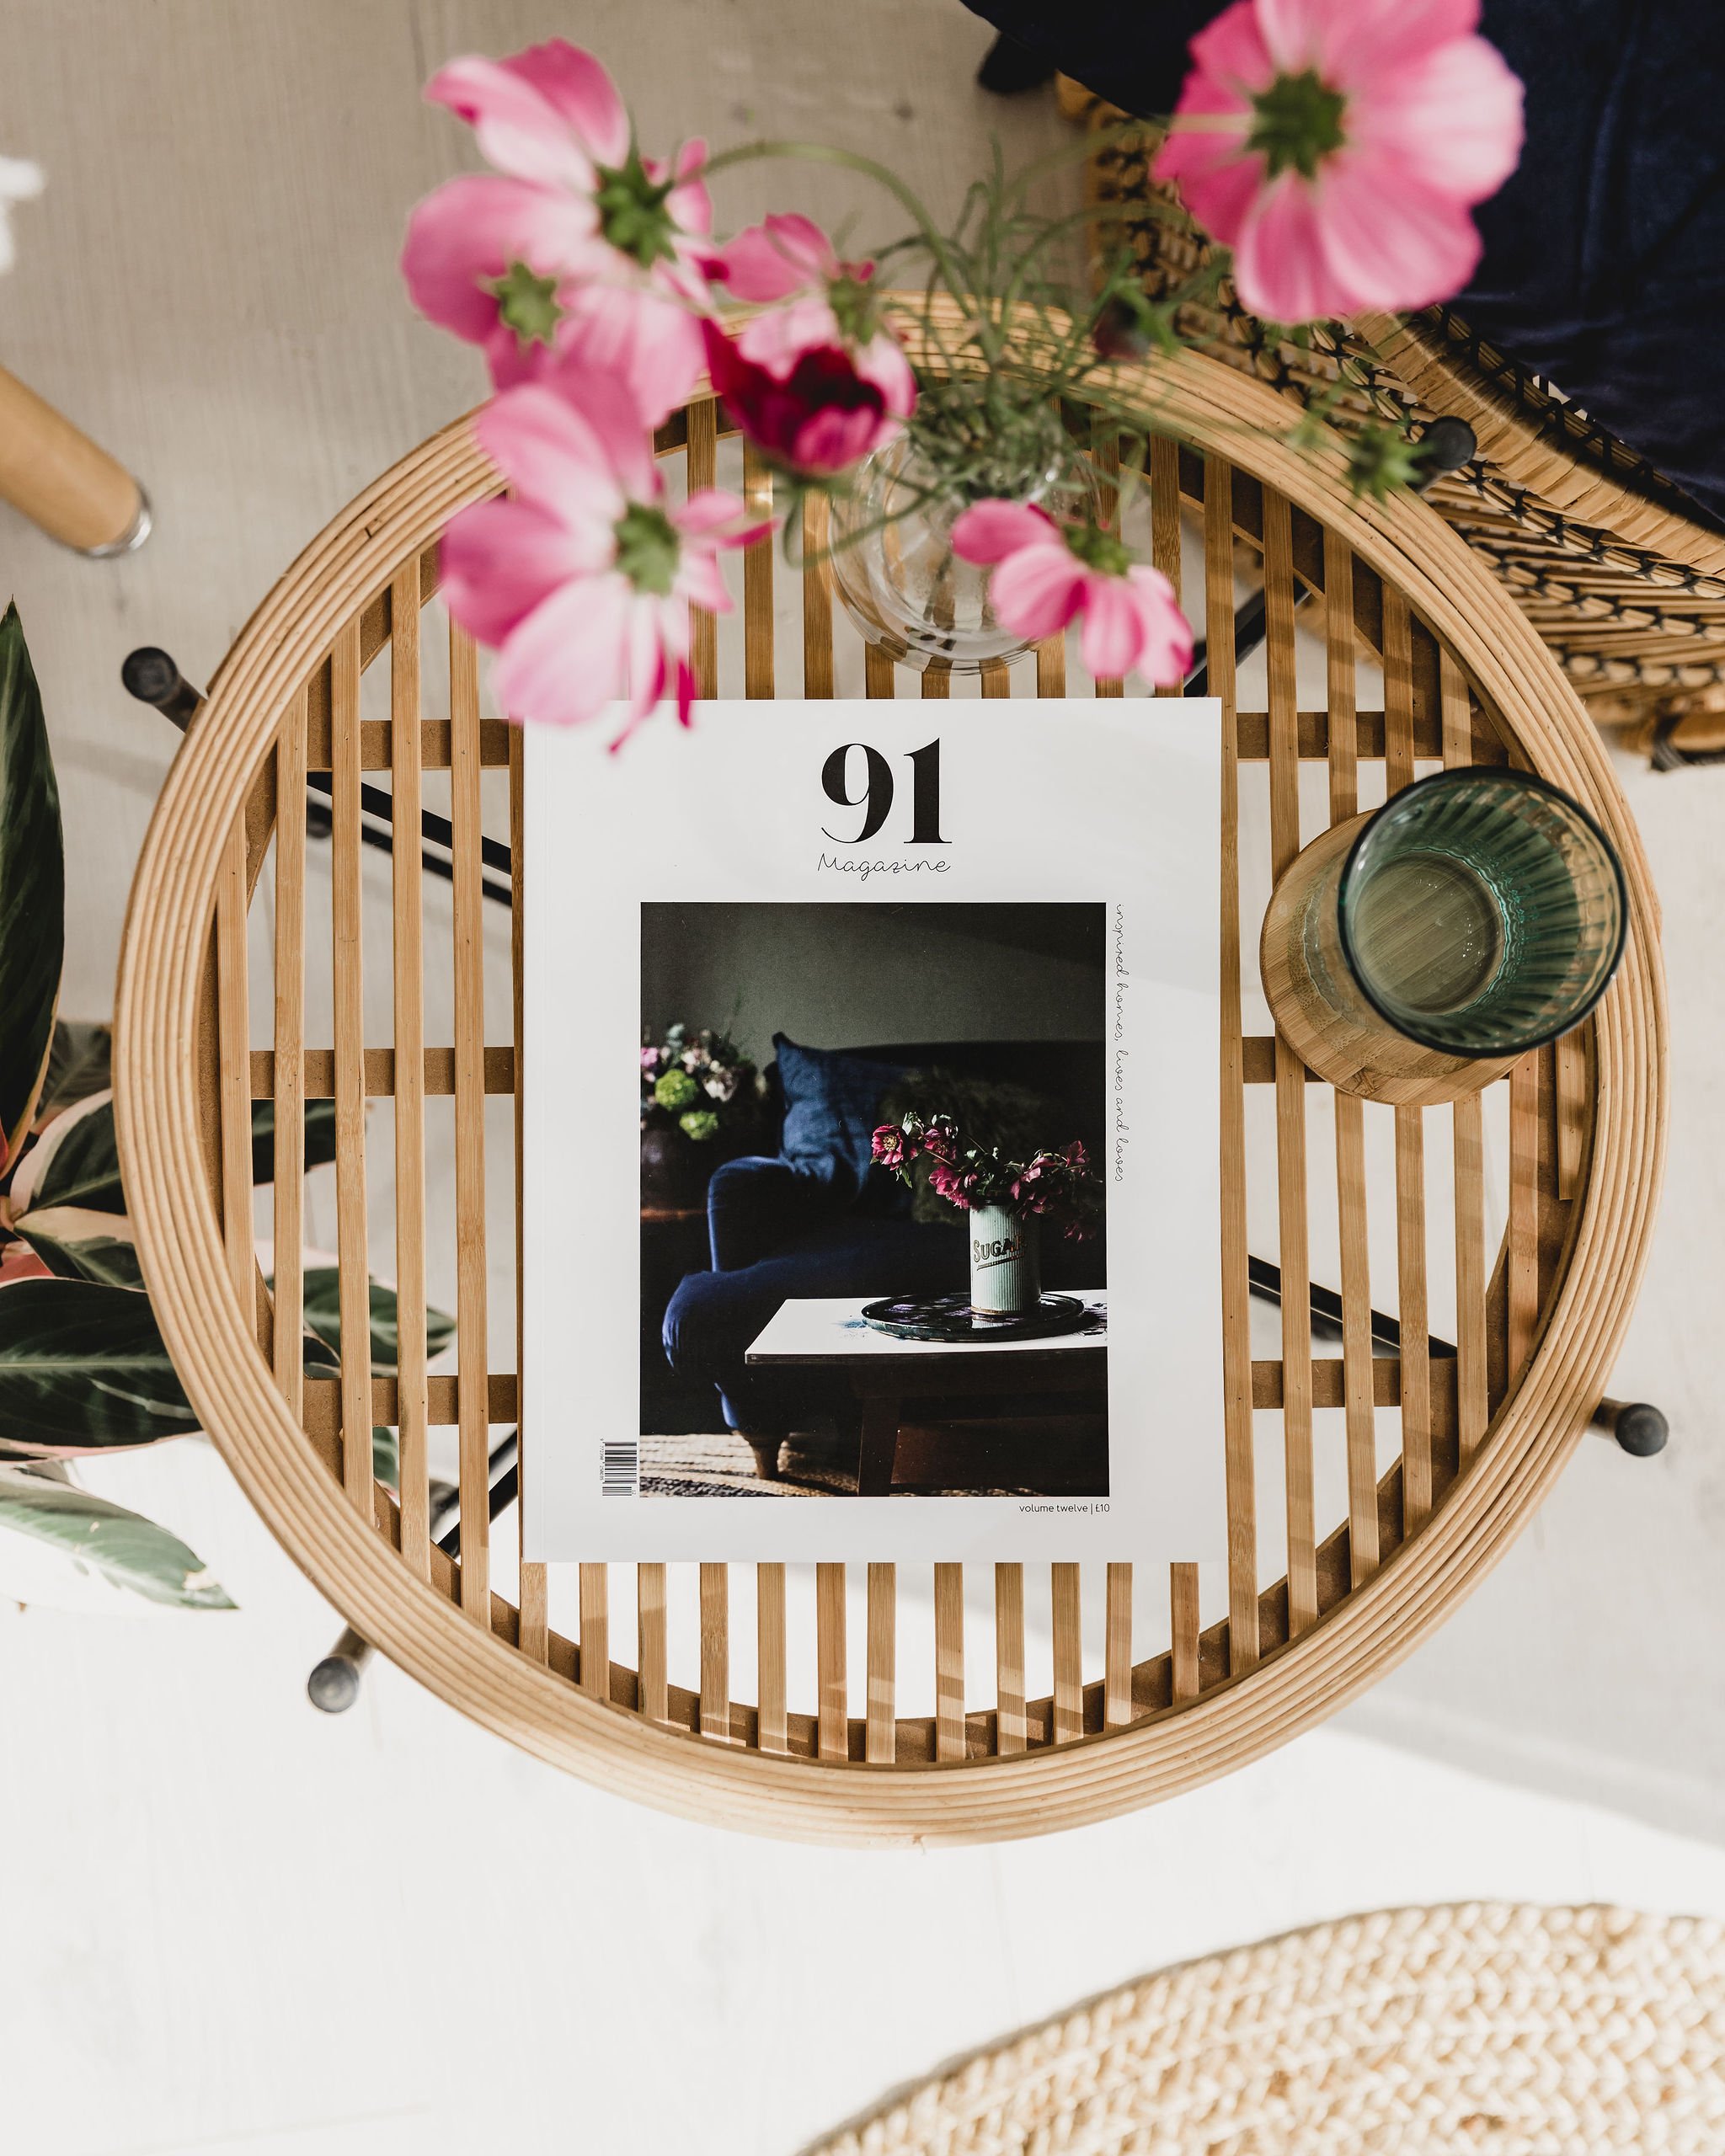 Print copy of 91 Magazine on wooden slatted table with pink flowers